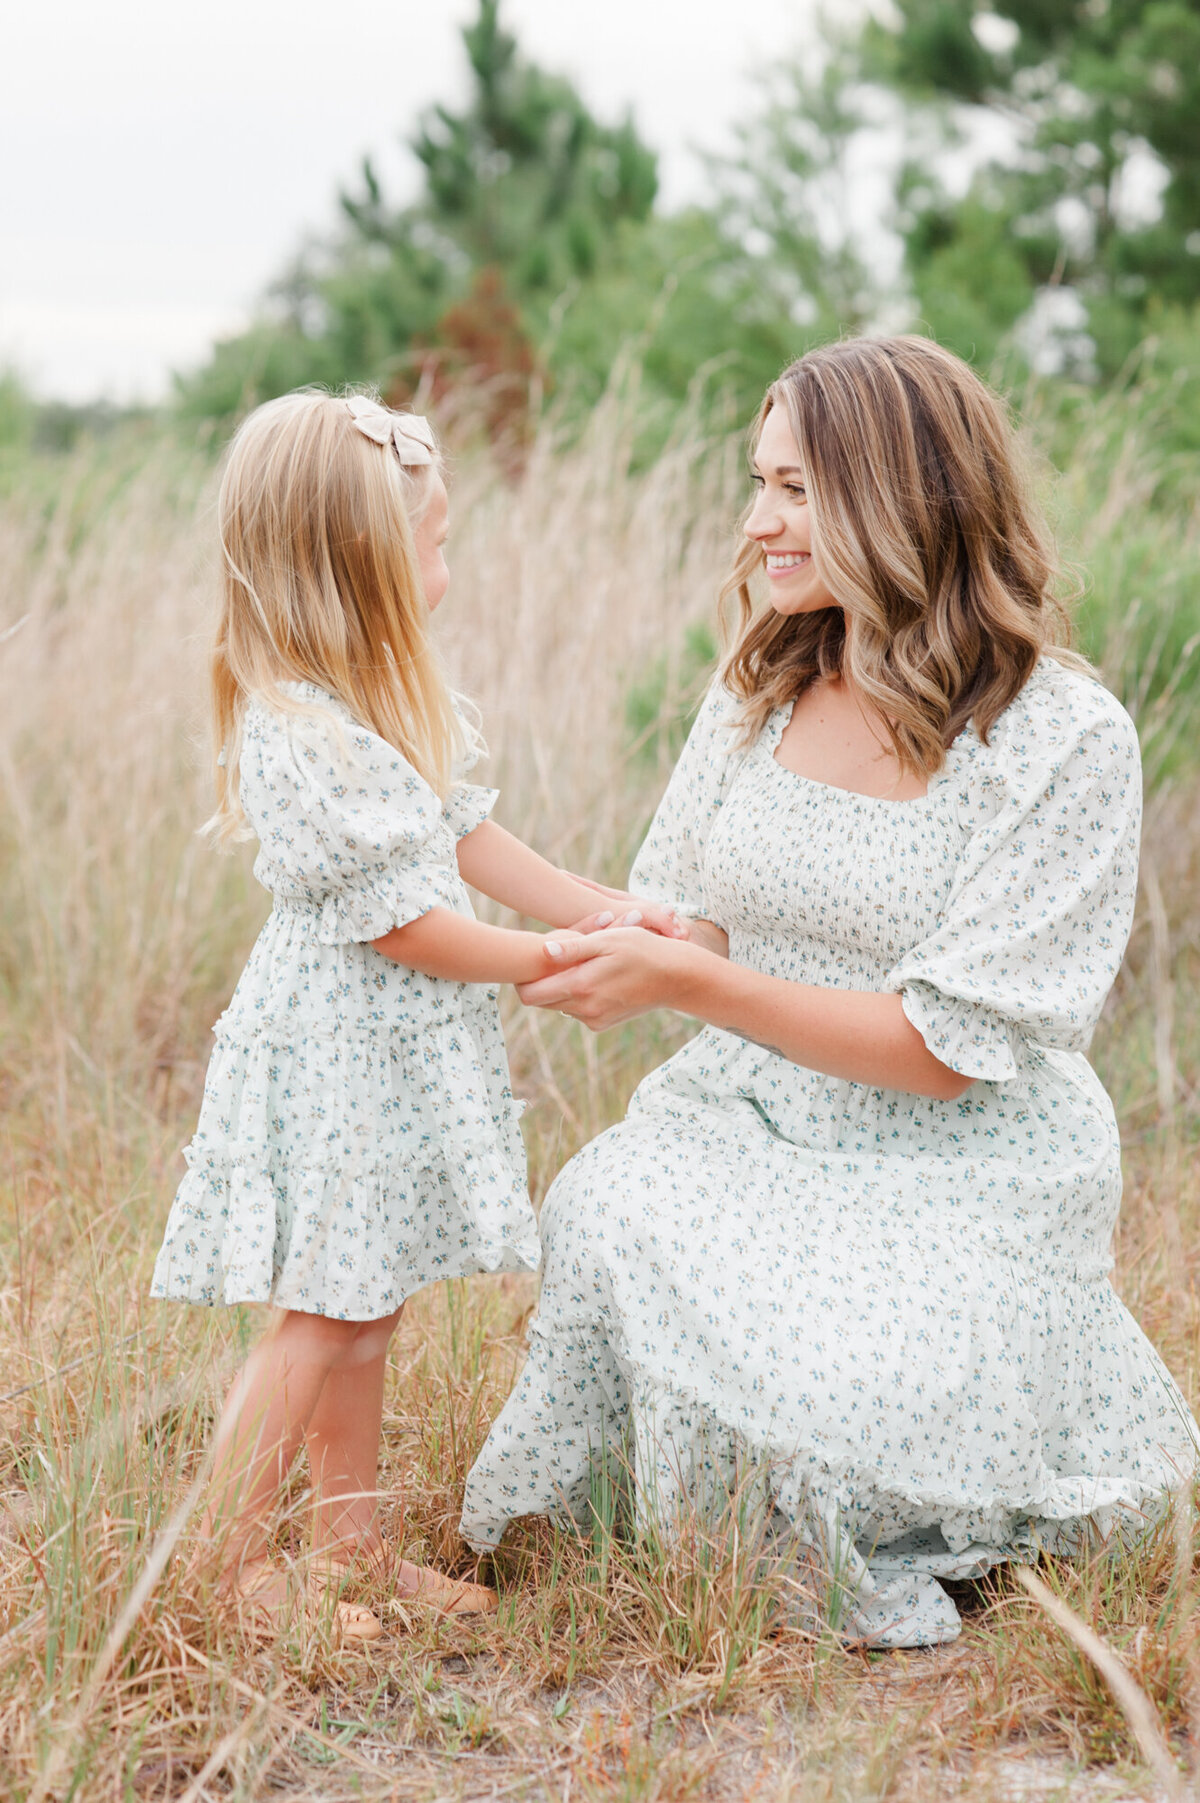 Mom and daughter smiling at each other and holding hands during their family photoshoot